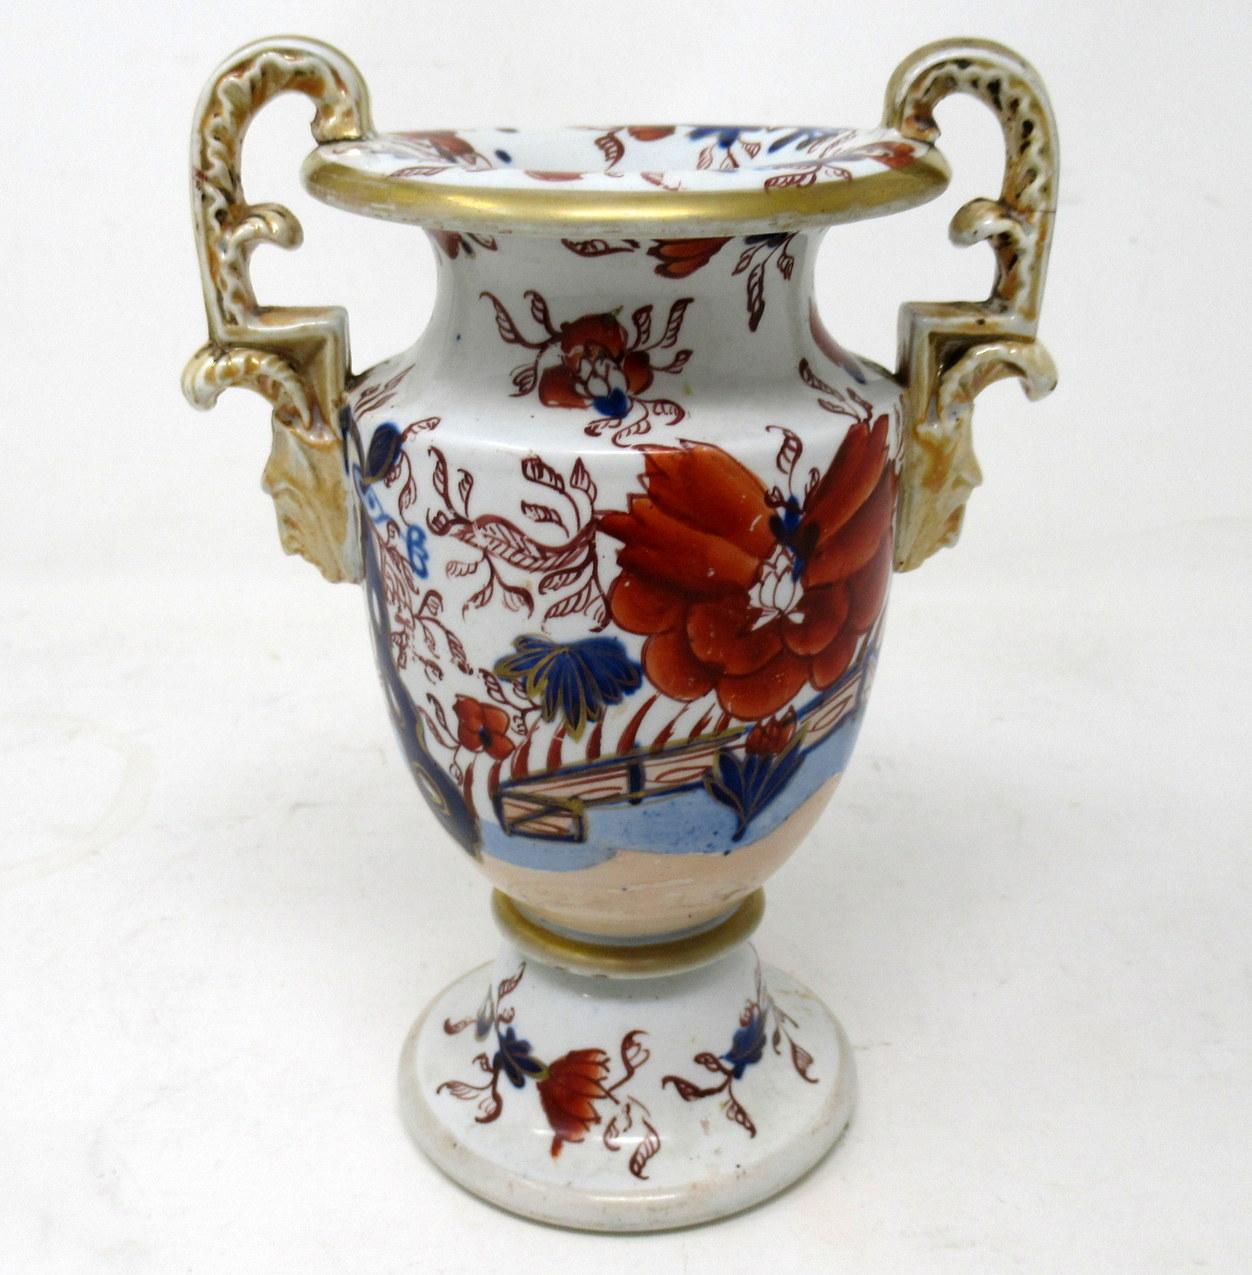 Rare example of an early English Chinoiserie Masons Ironstone China twin gilt handled Vase of compact proportions decorated in the Japan “Fence Pattern”, depicting flowers and foliage in colours of iron red and blues on a white ground. Octagonal